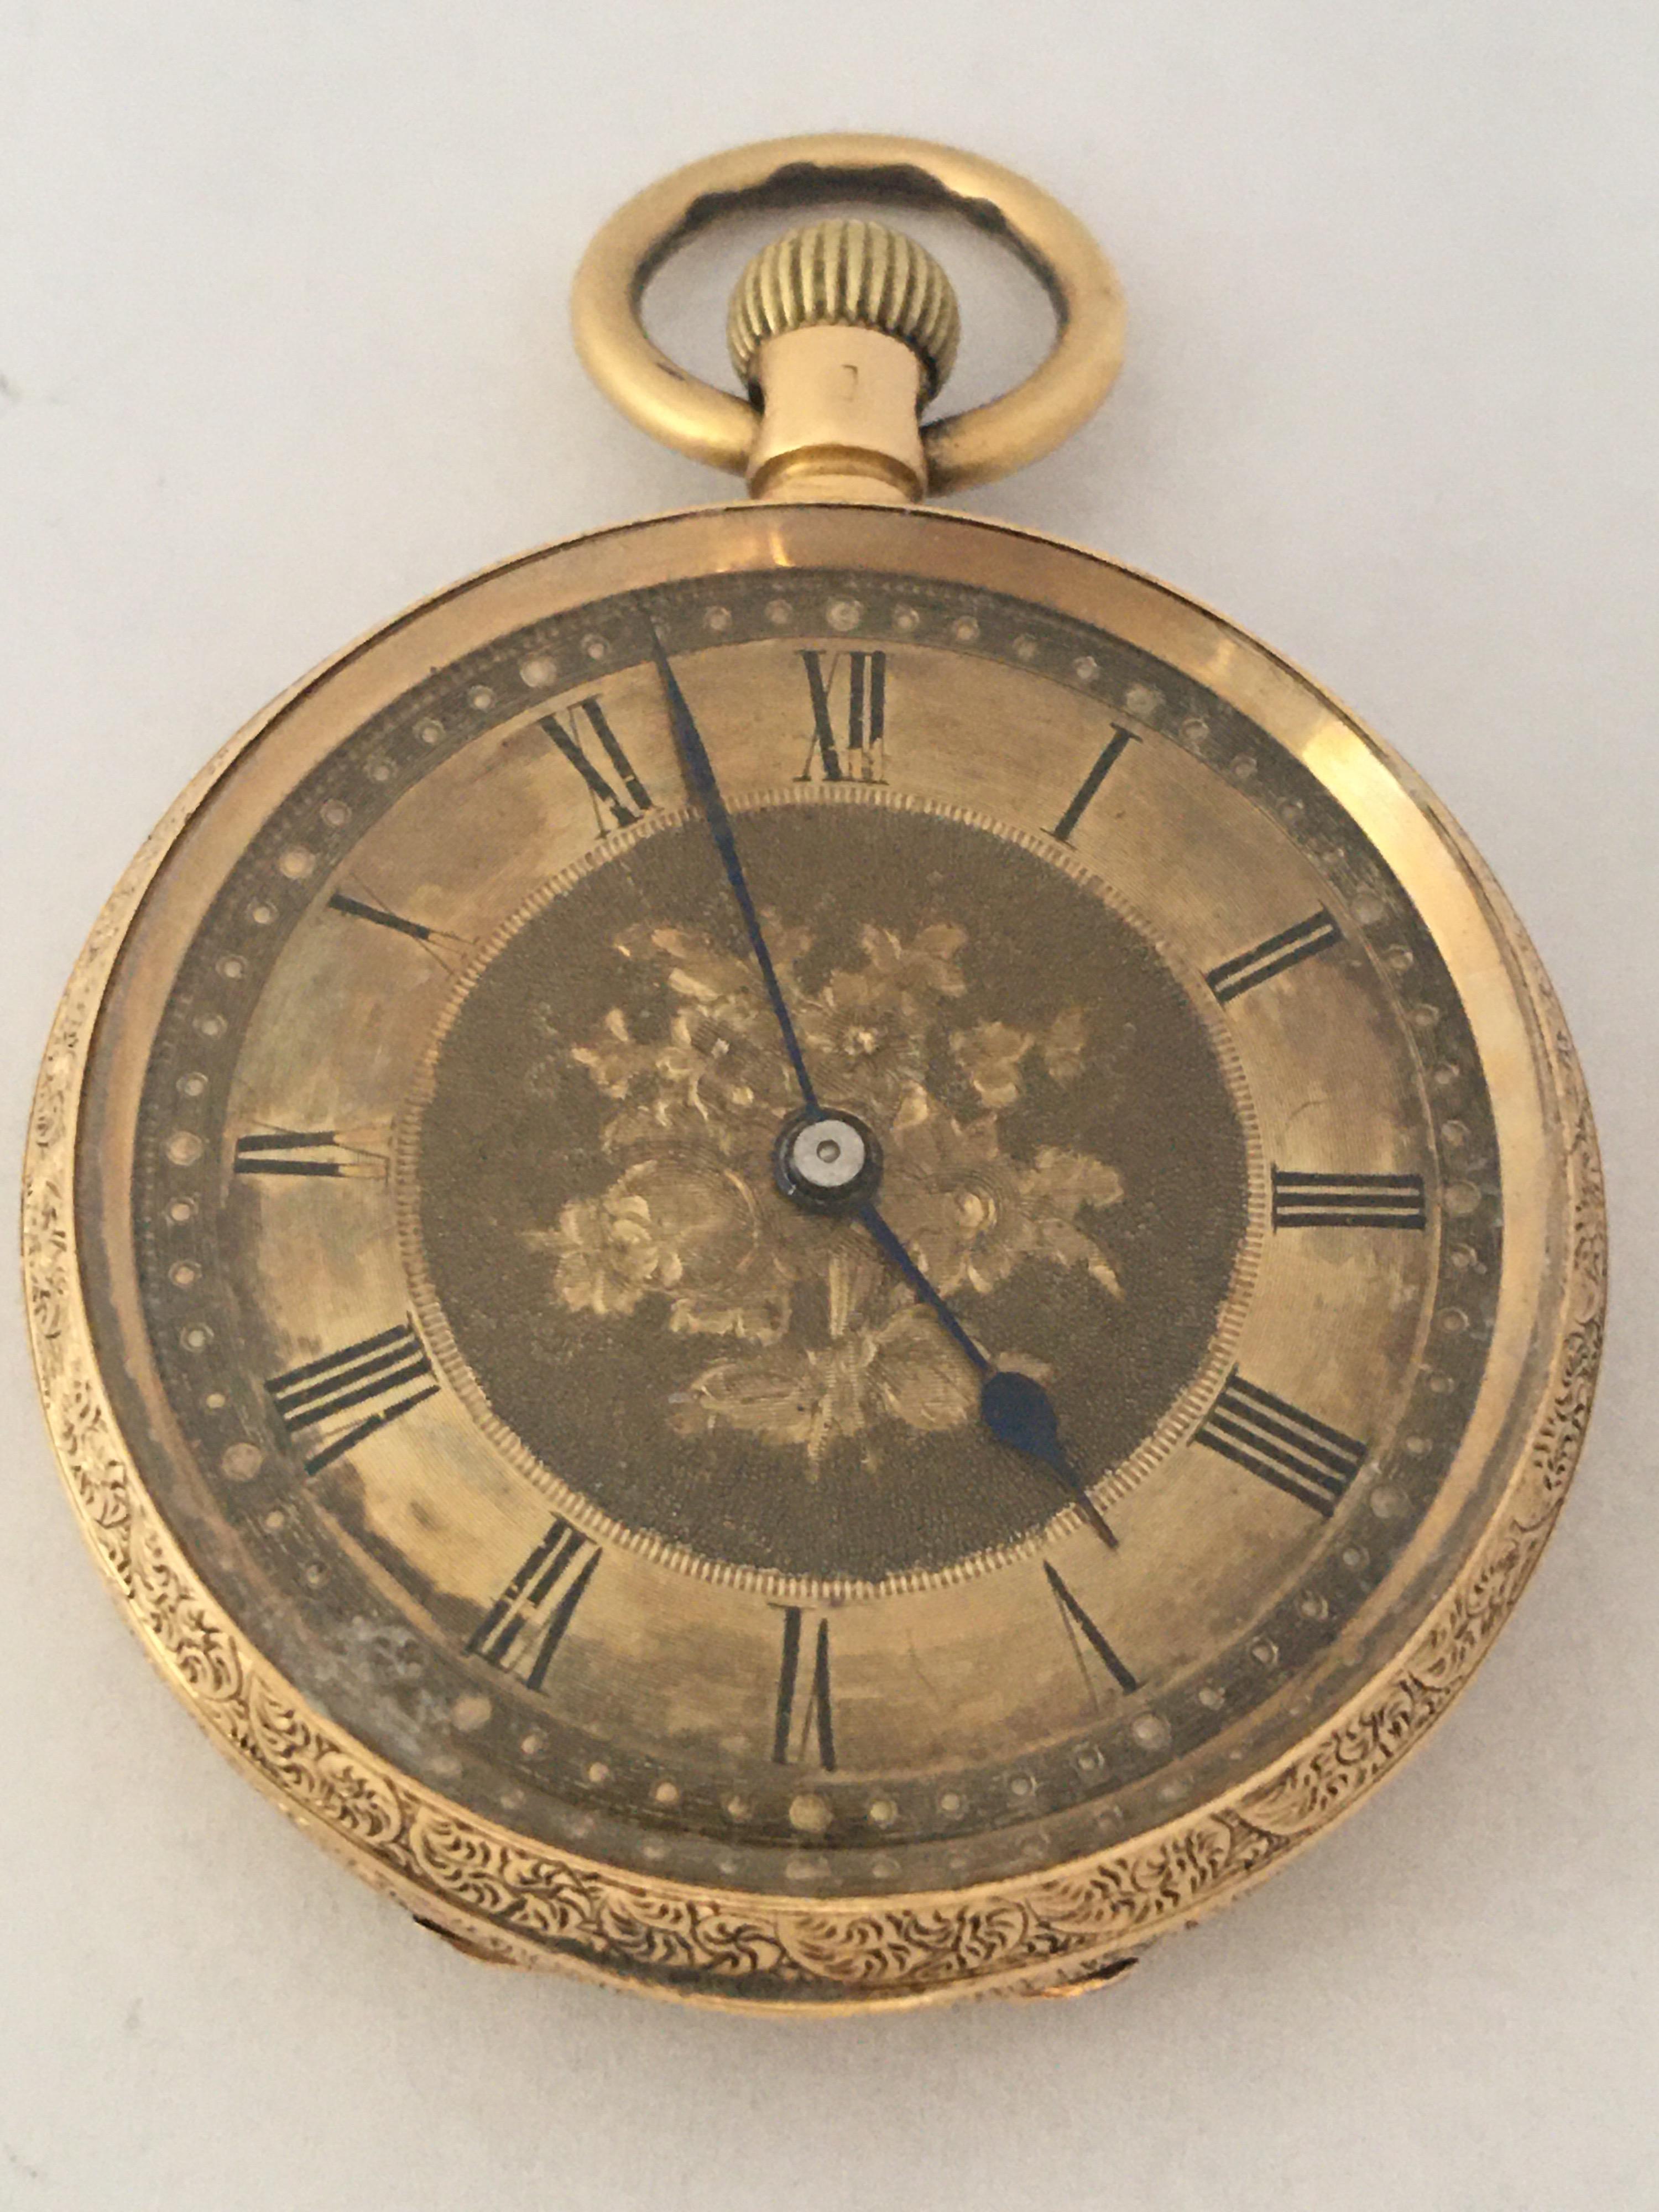 This beautiful Victorian period pin setting 38mm diameter Hand winding pocket watch is in good working condition and it is running well. Visible signs of ageing and wear with light tiny marks on the glass surface as shown. The gold dial is a bit